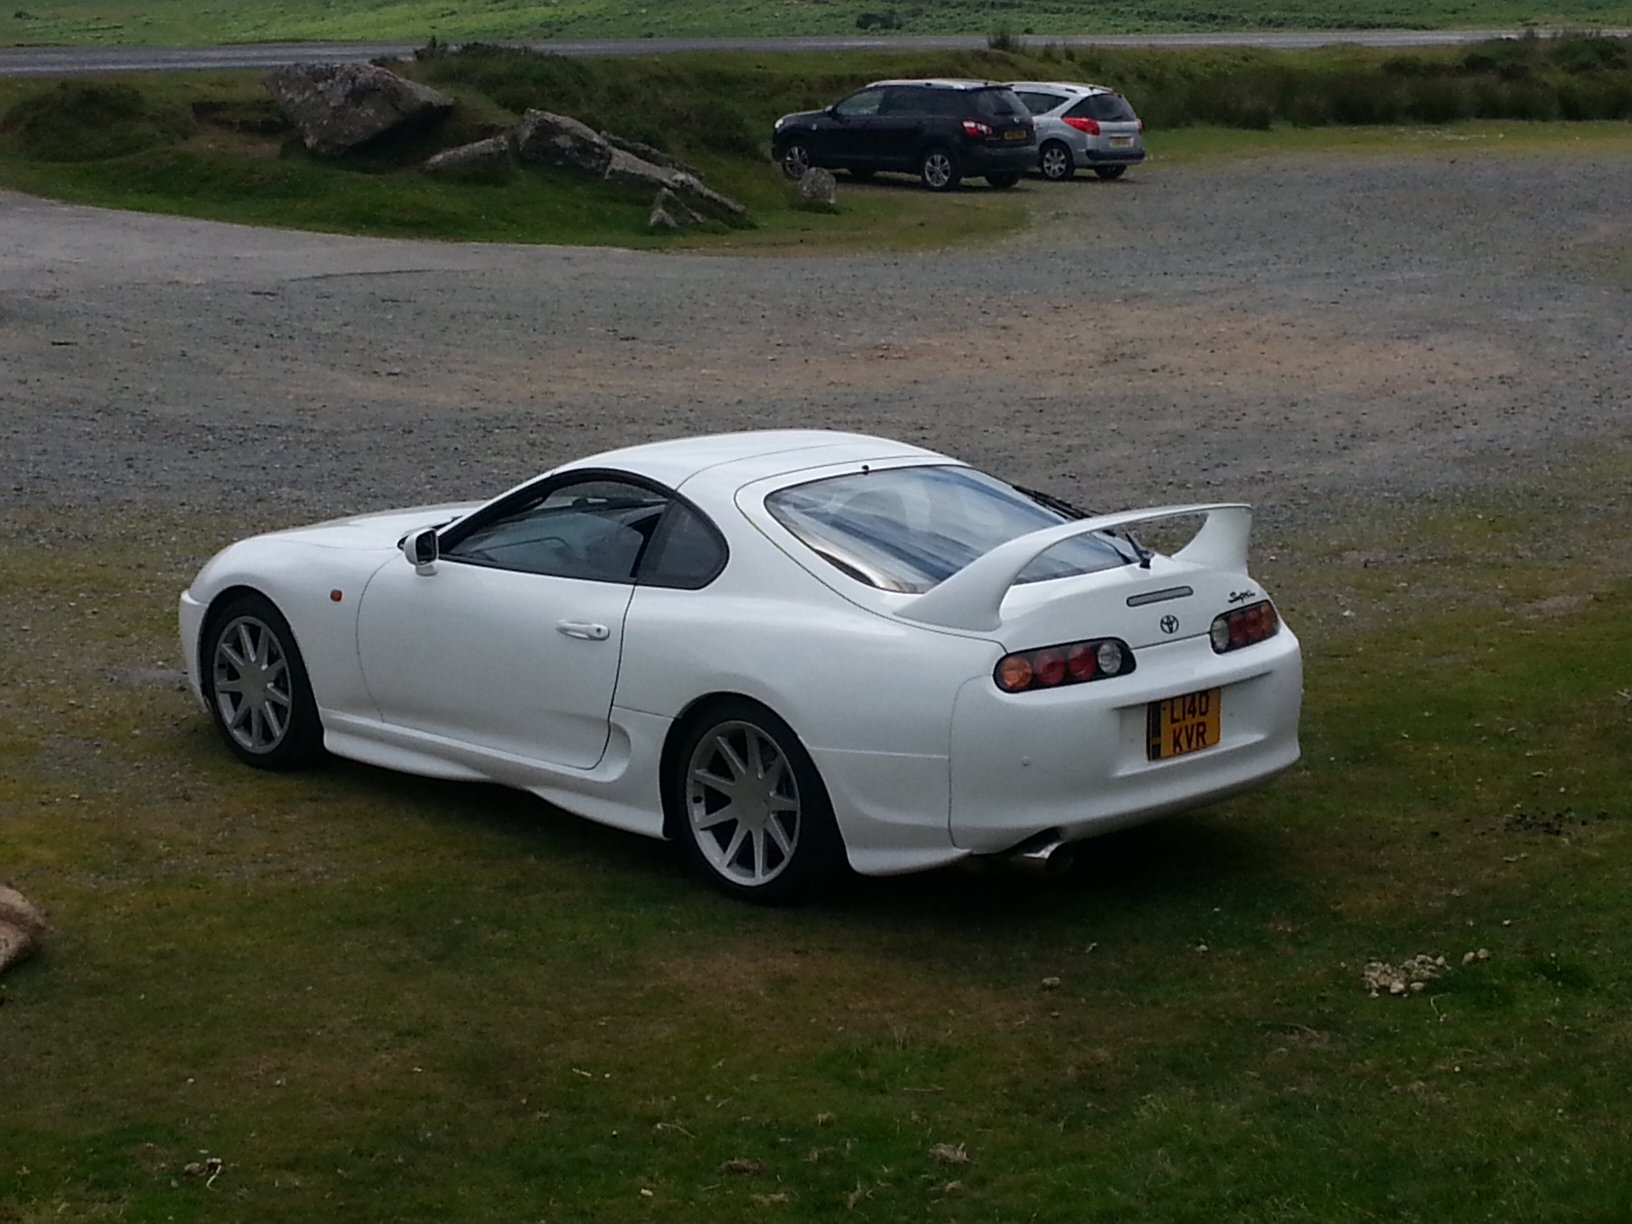 Project White Gold - 'The One That Nearly Got Away'. - mkiv Supra